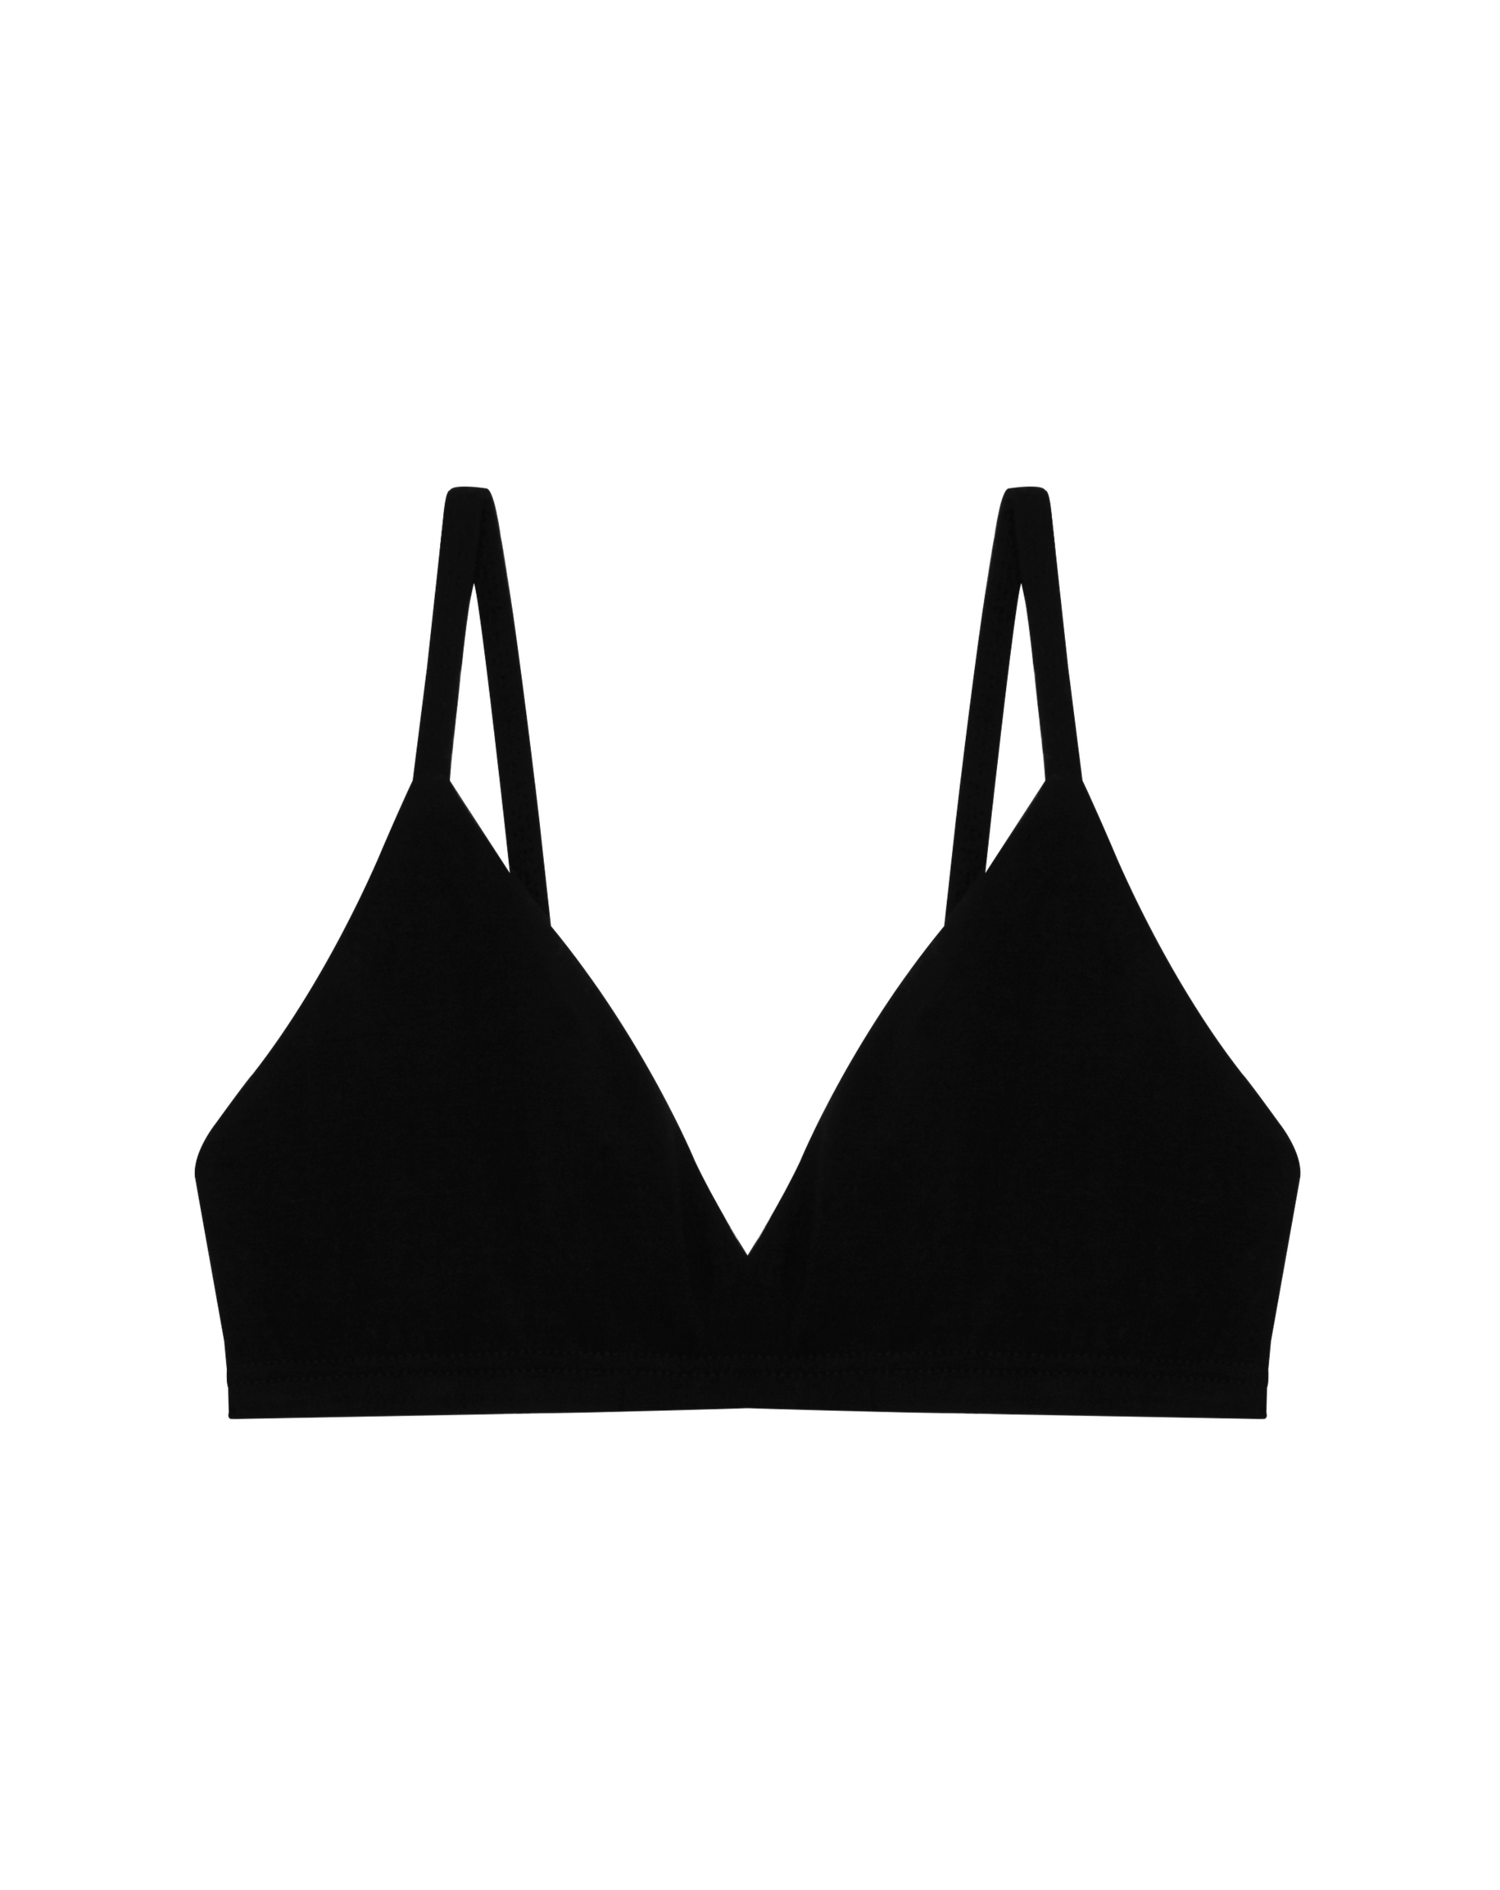 Introducing: The Sporty Bralette – huha underwear